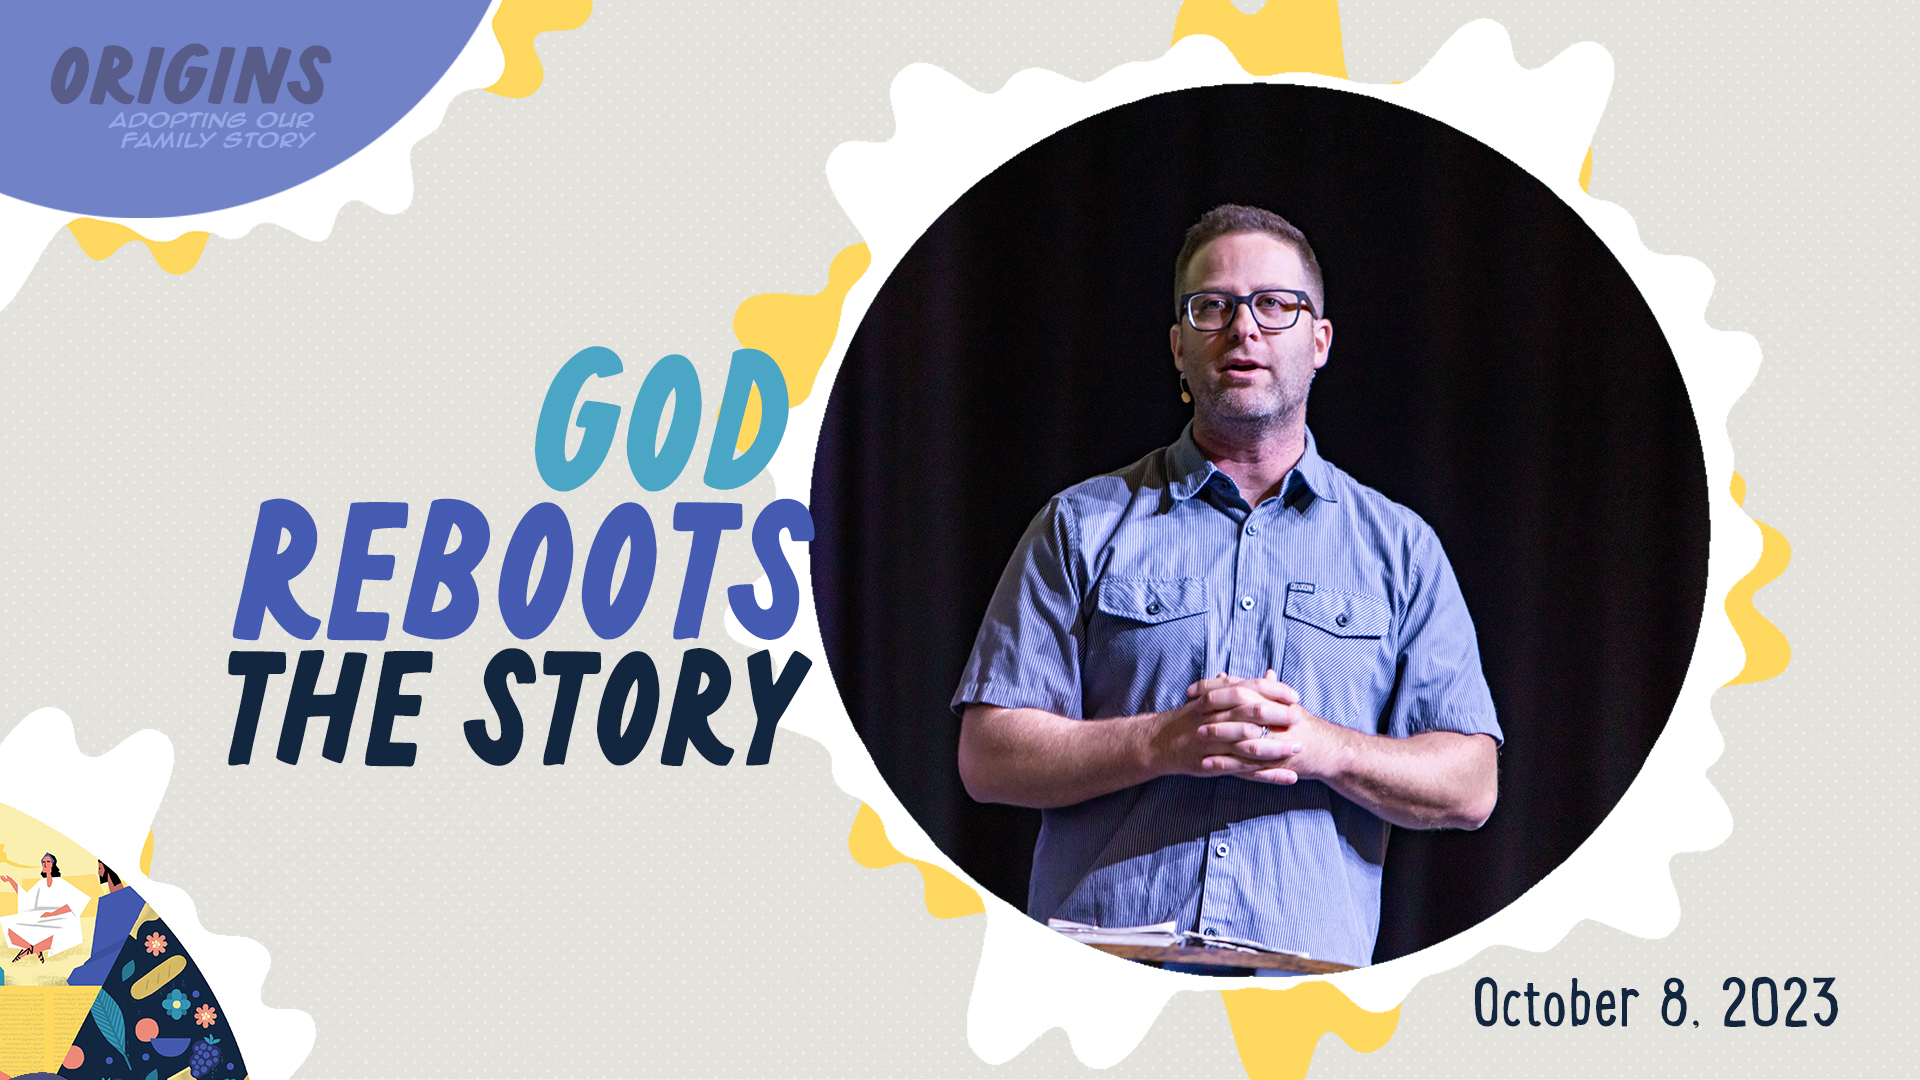 God Reboots the Story